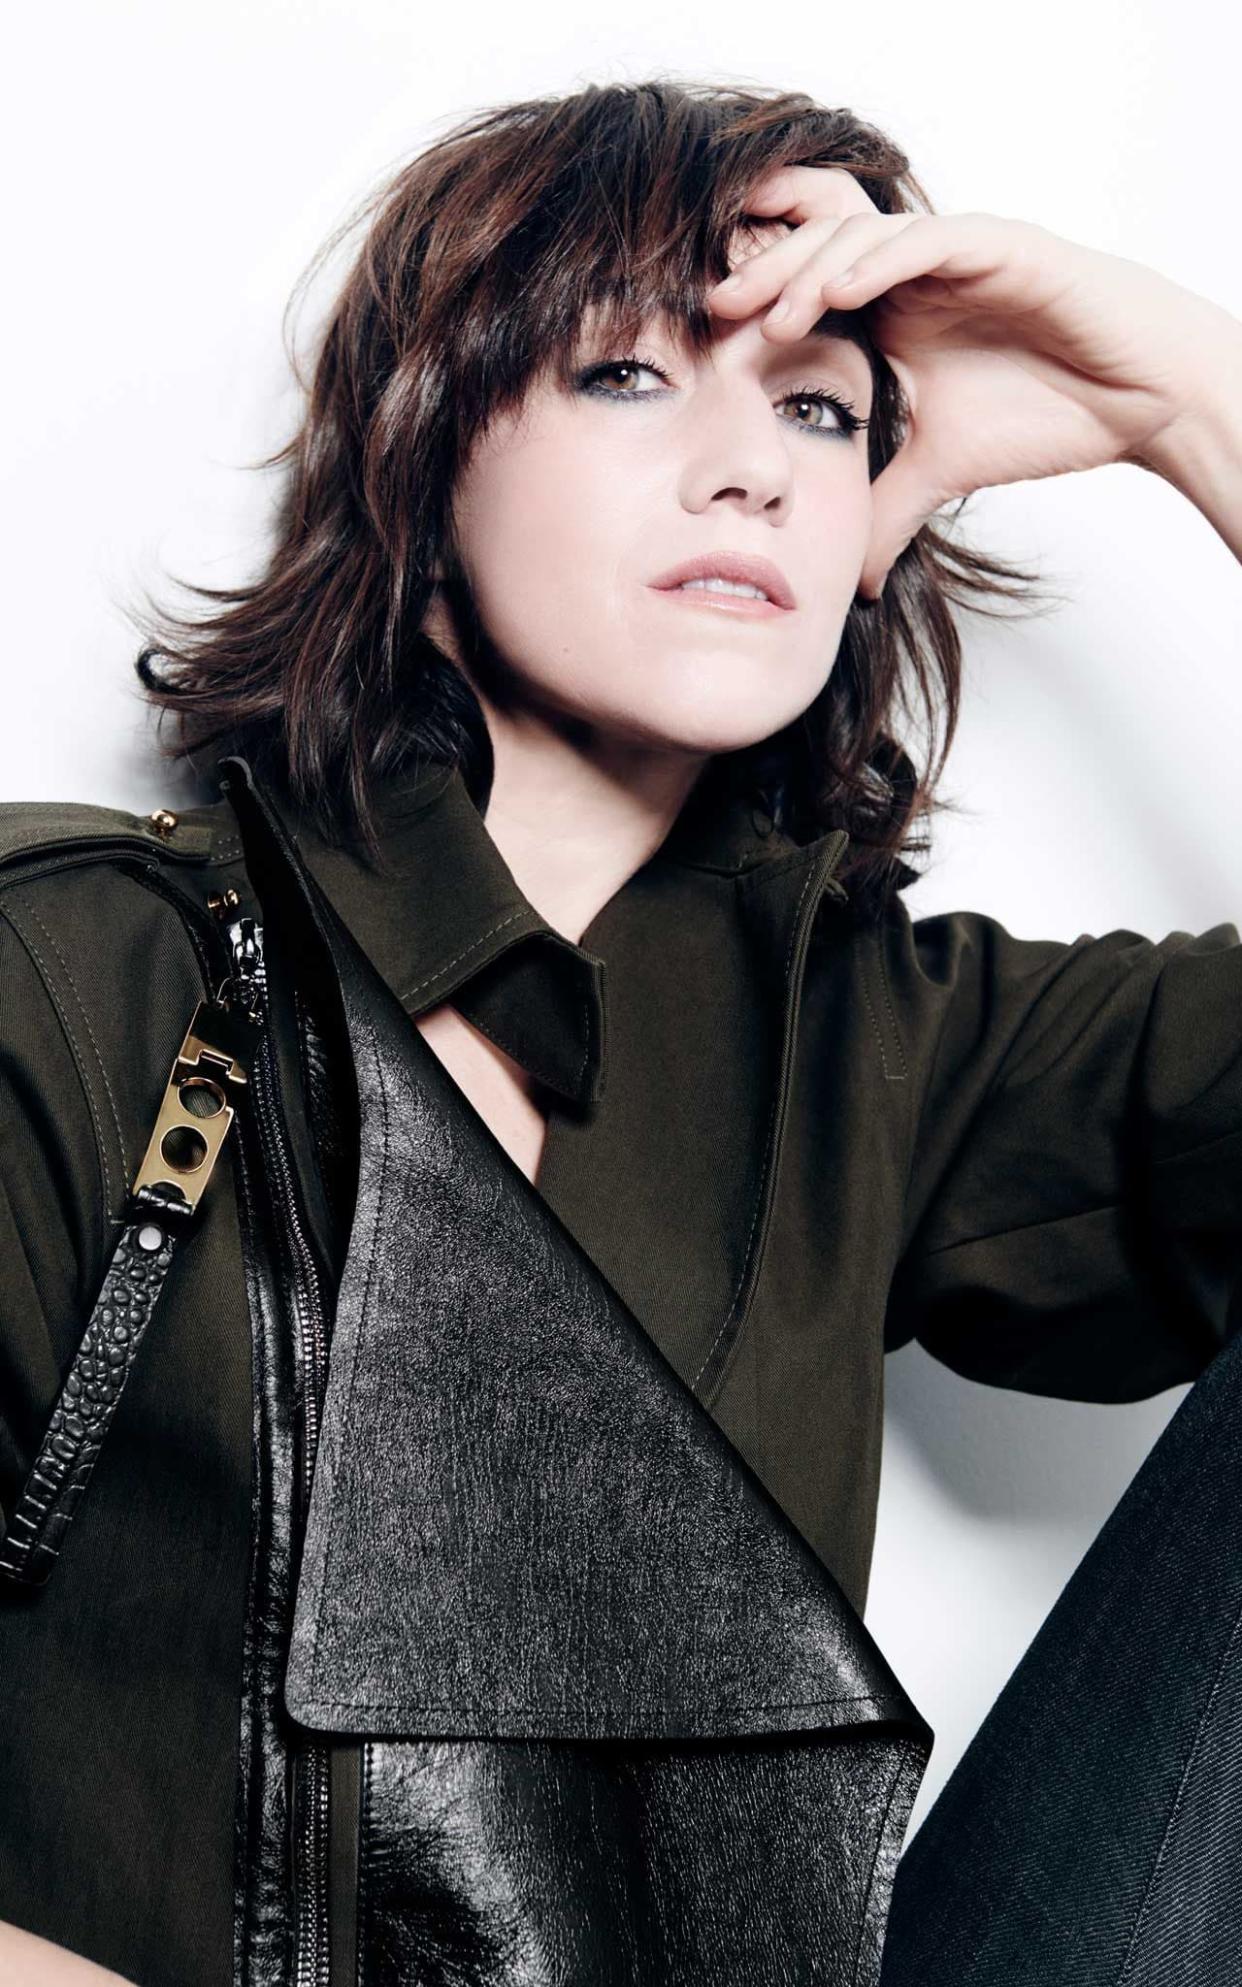 The iconic French actress and model Charlotte Gainsbourg shares her beauty and style tips  -